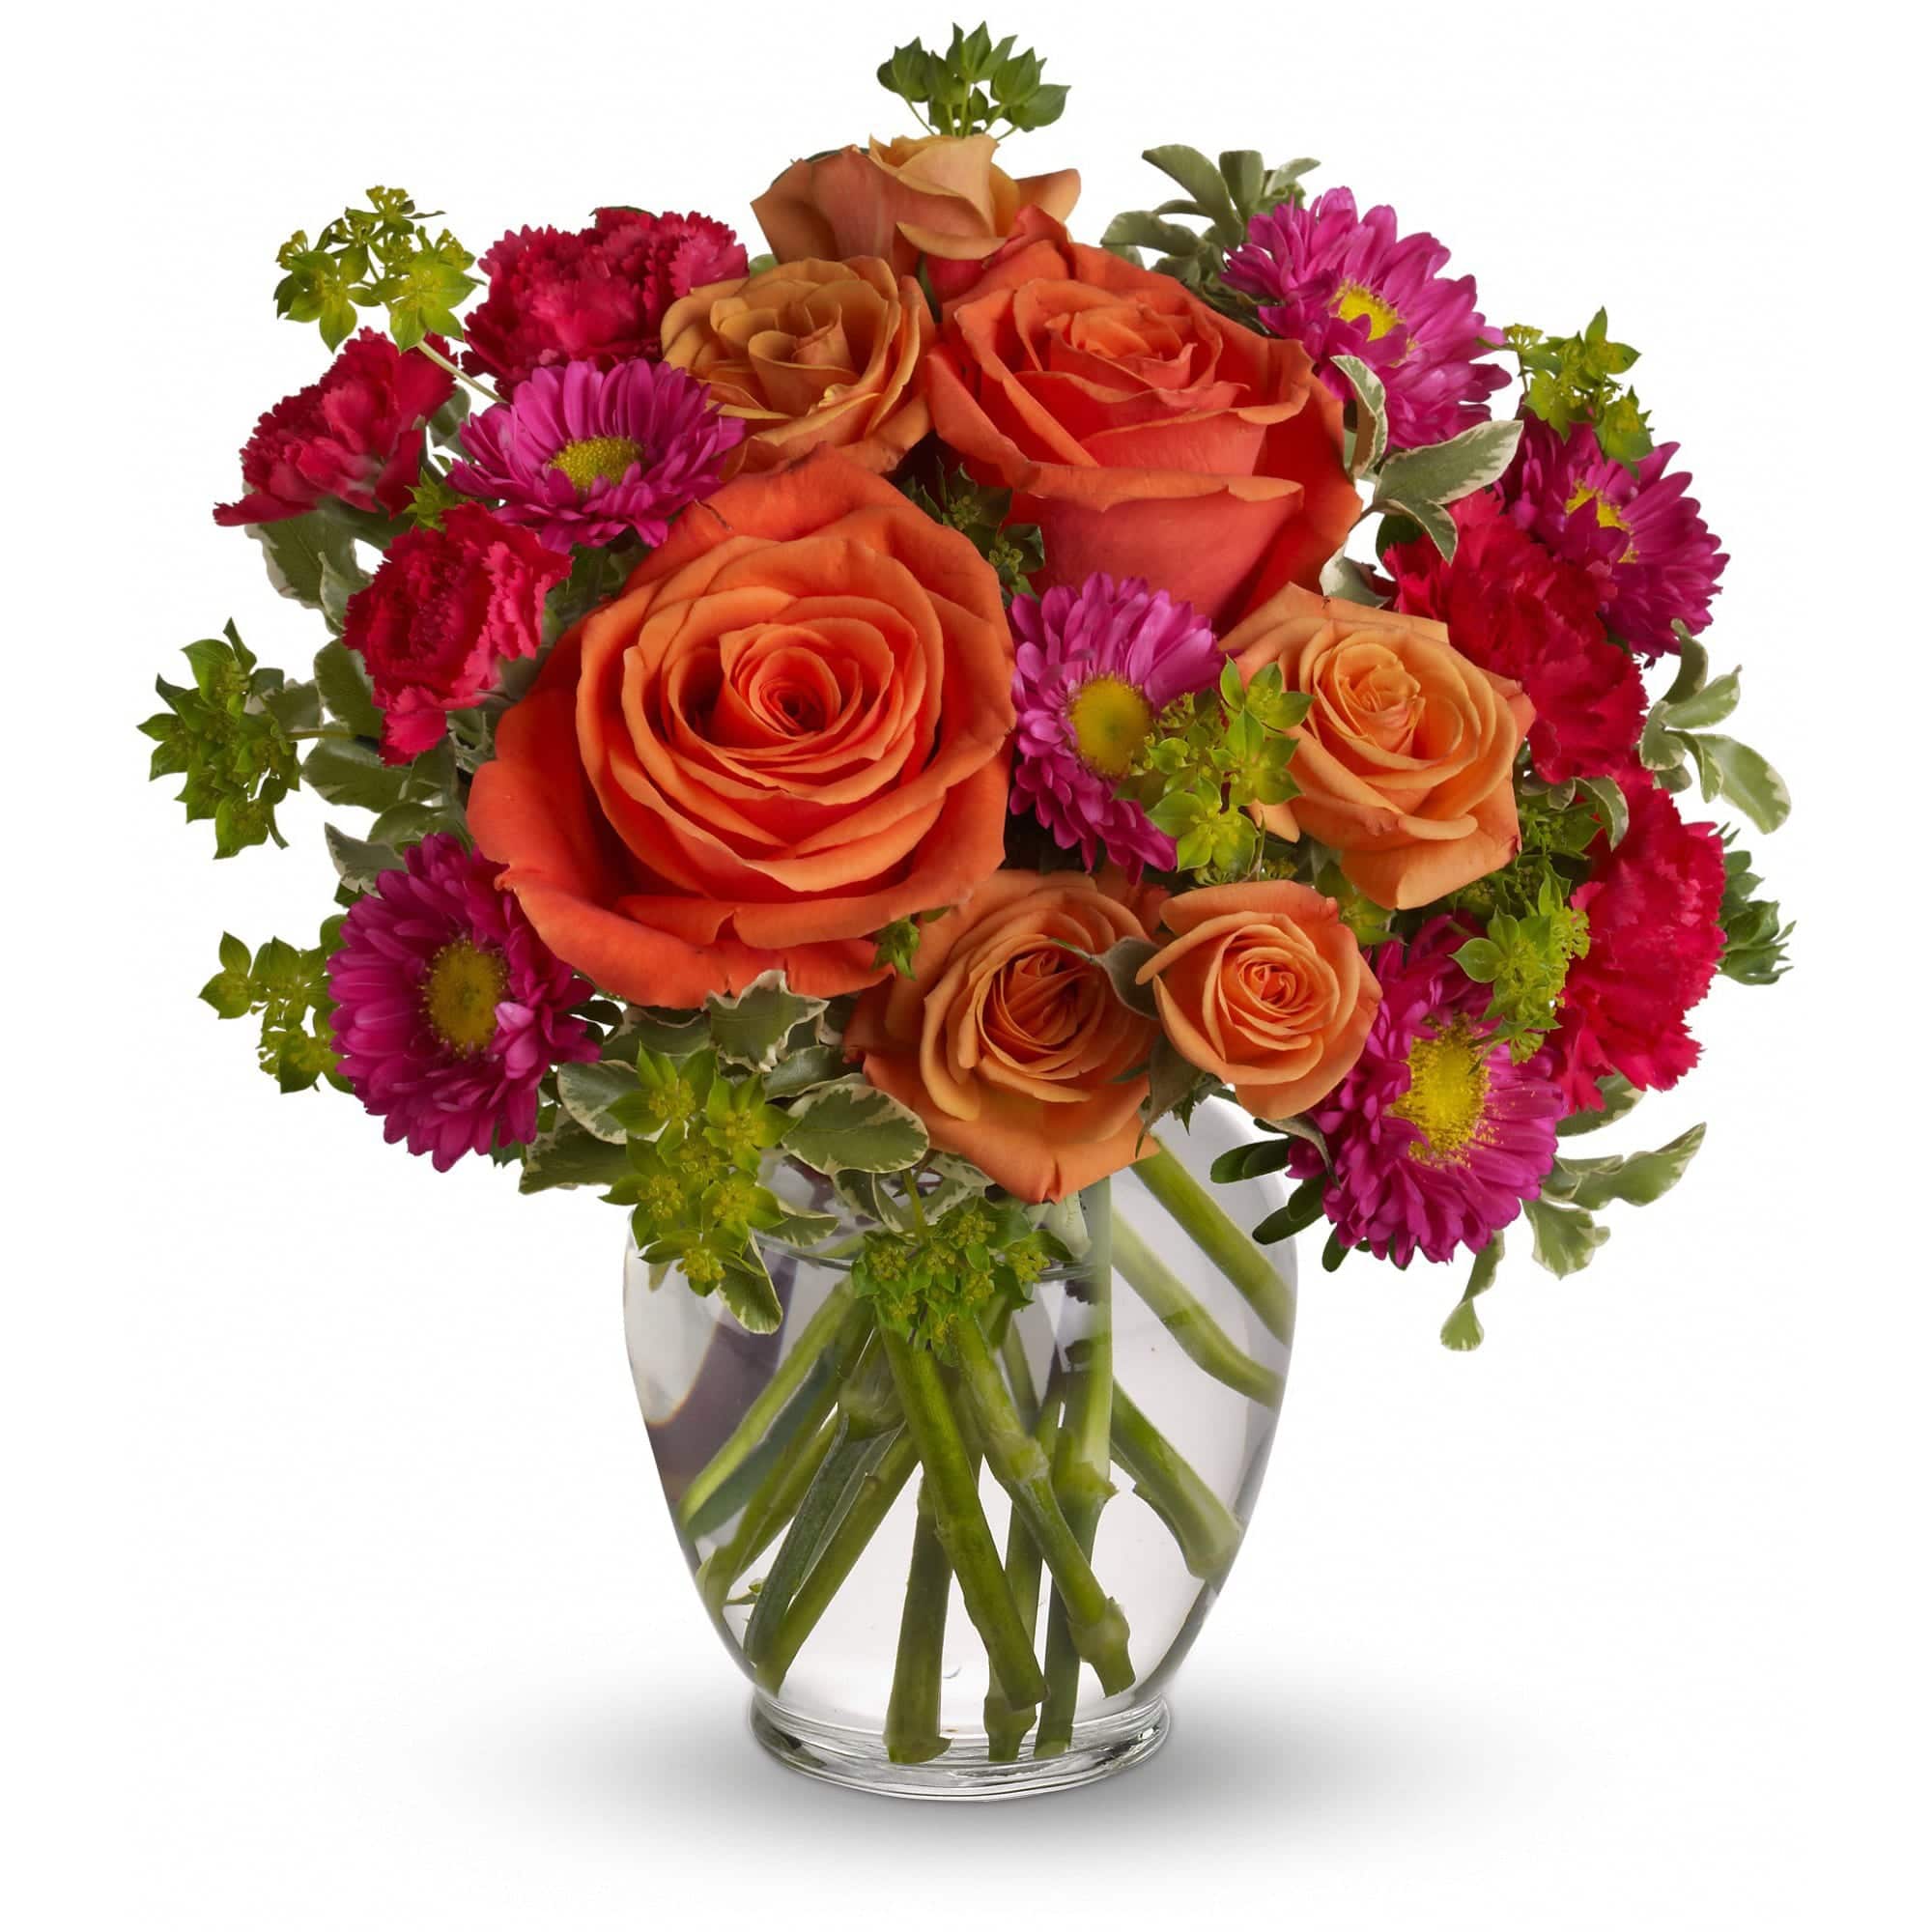 roses and carnations in glass vase